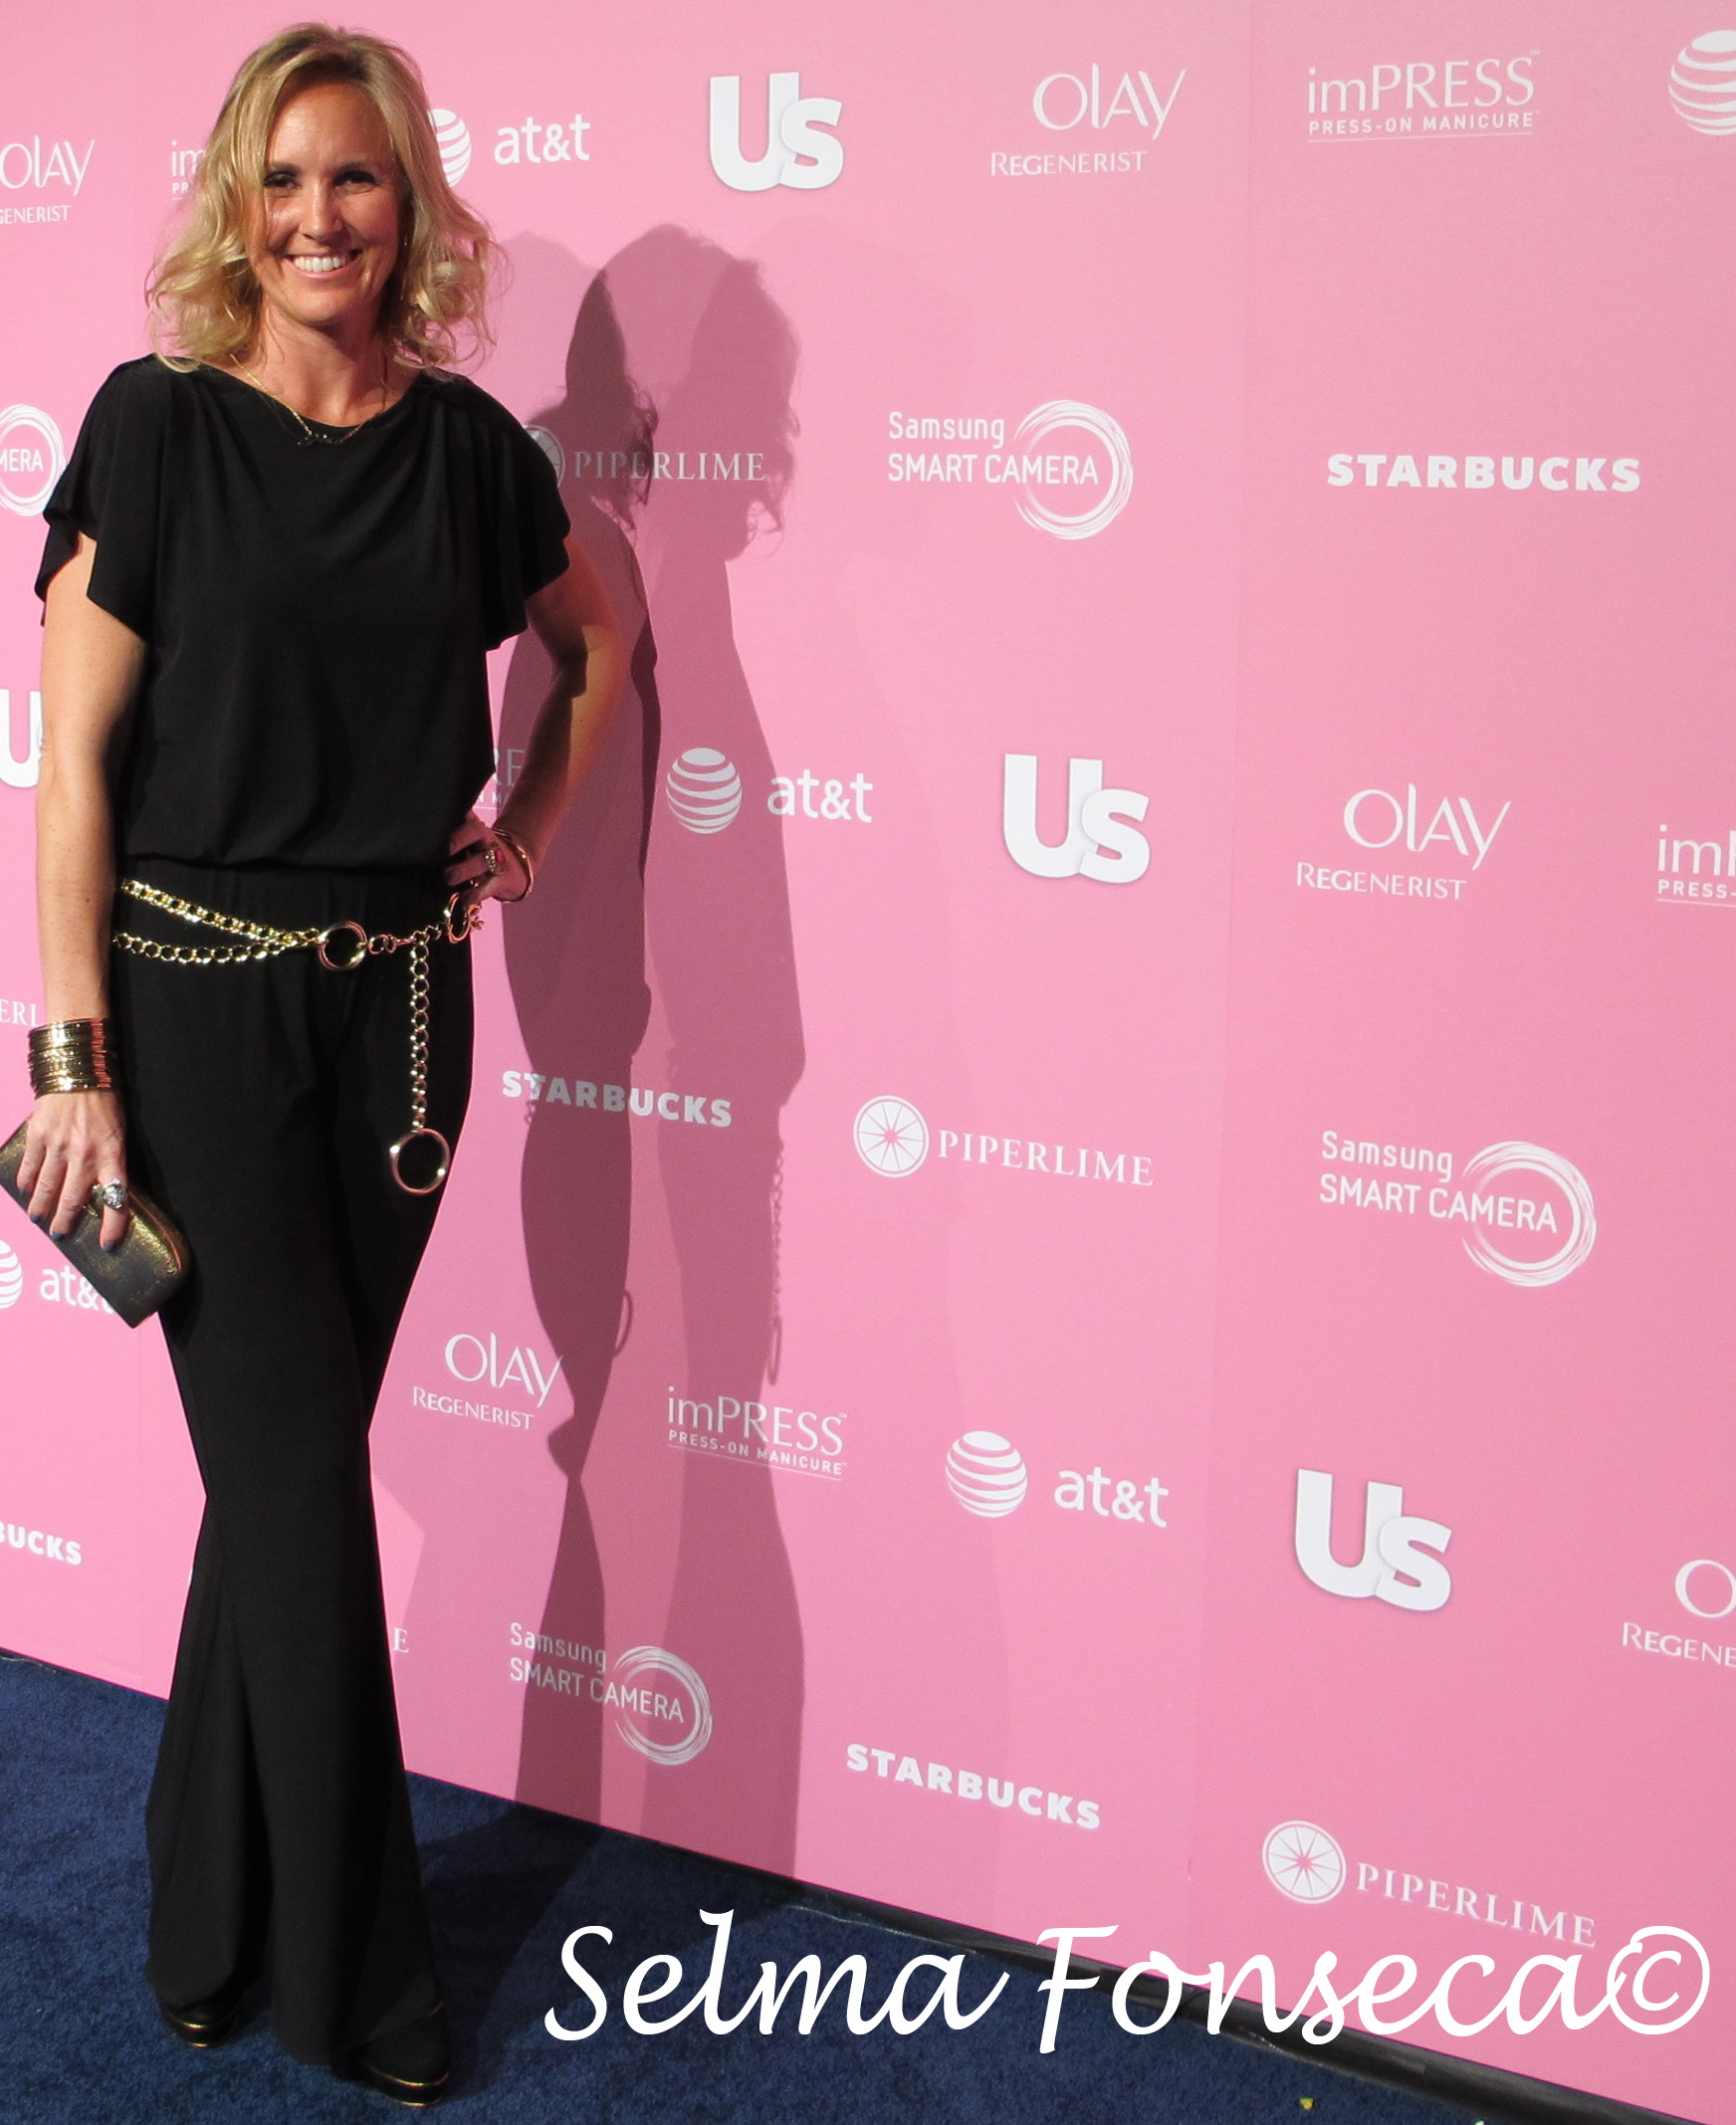 Gina Greblo at the US Weekly Hot Hollywood Style Event